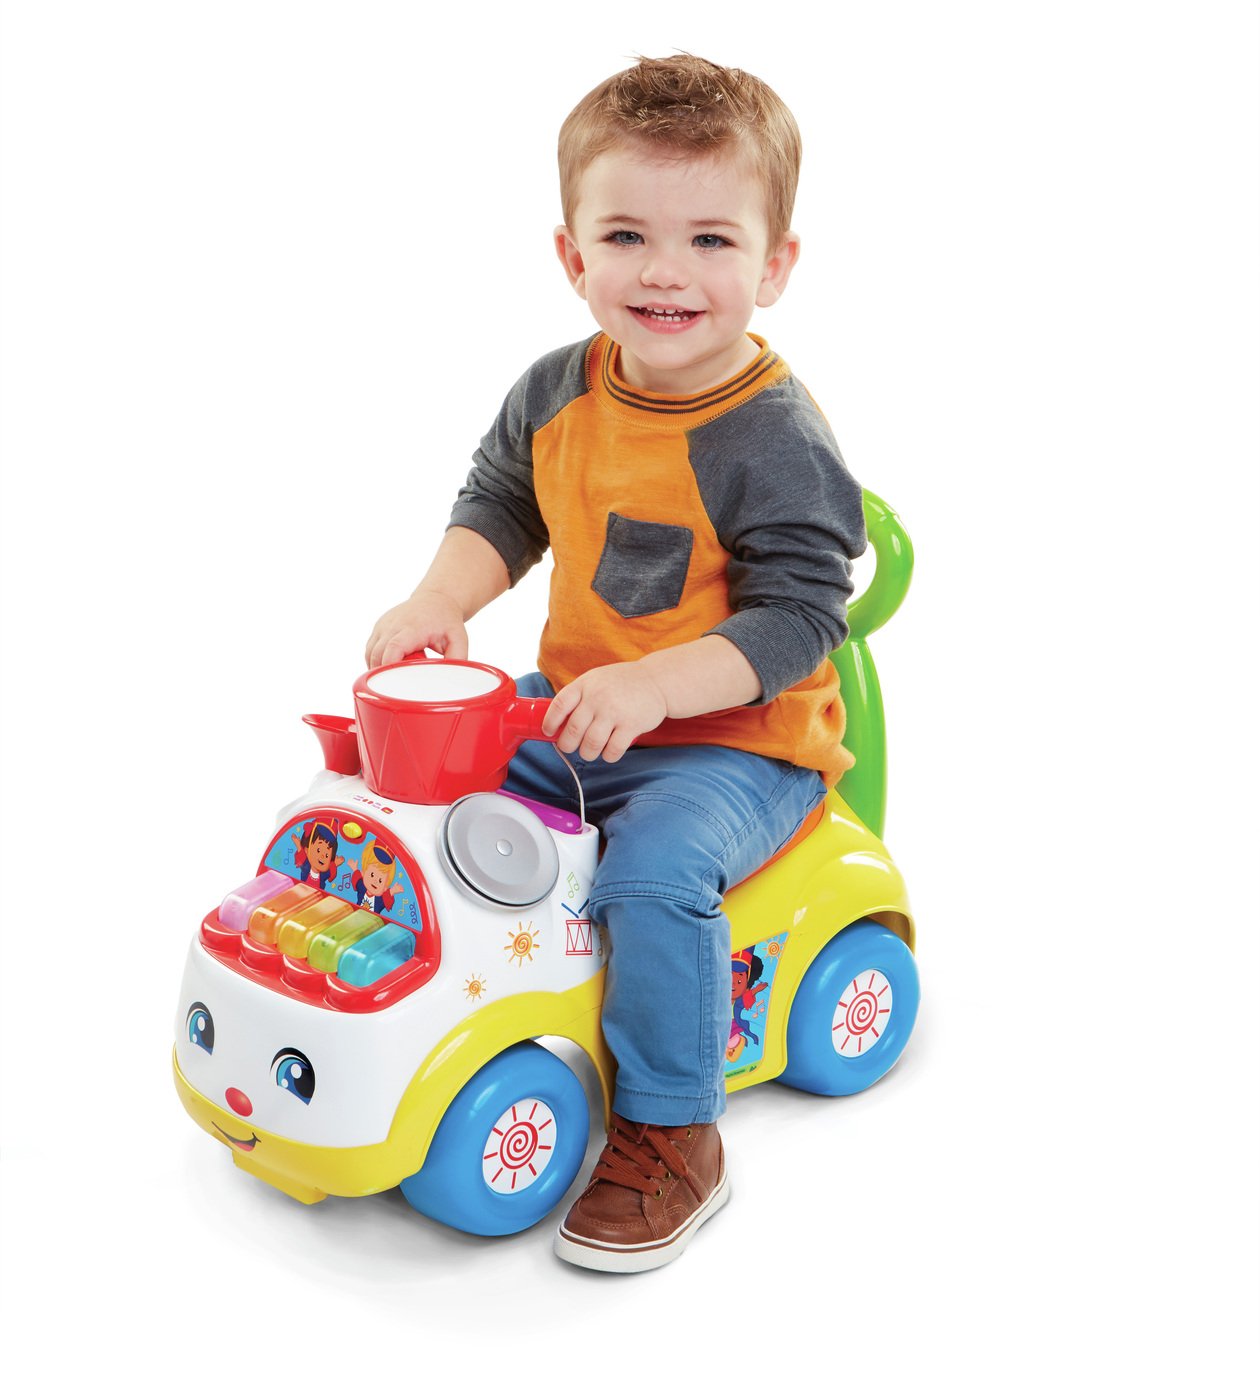 fisher price car push and ride